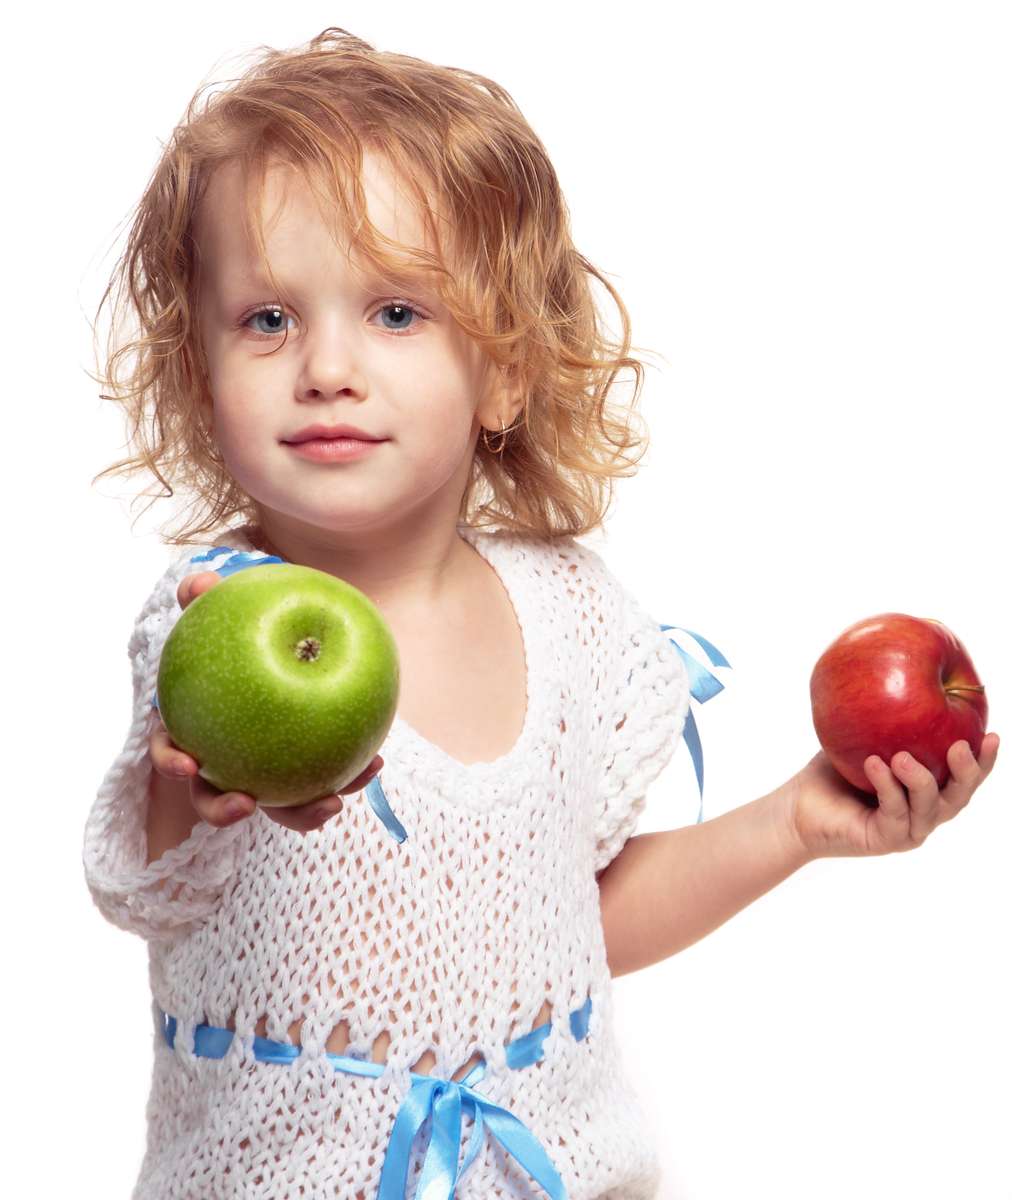 child holding two apples out as if offering them to someone